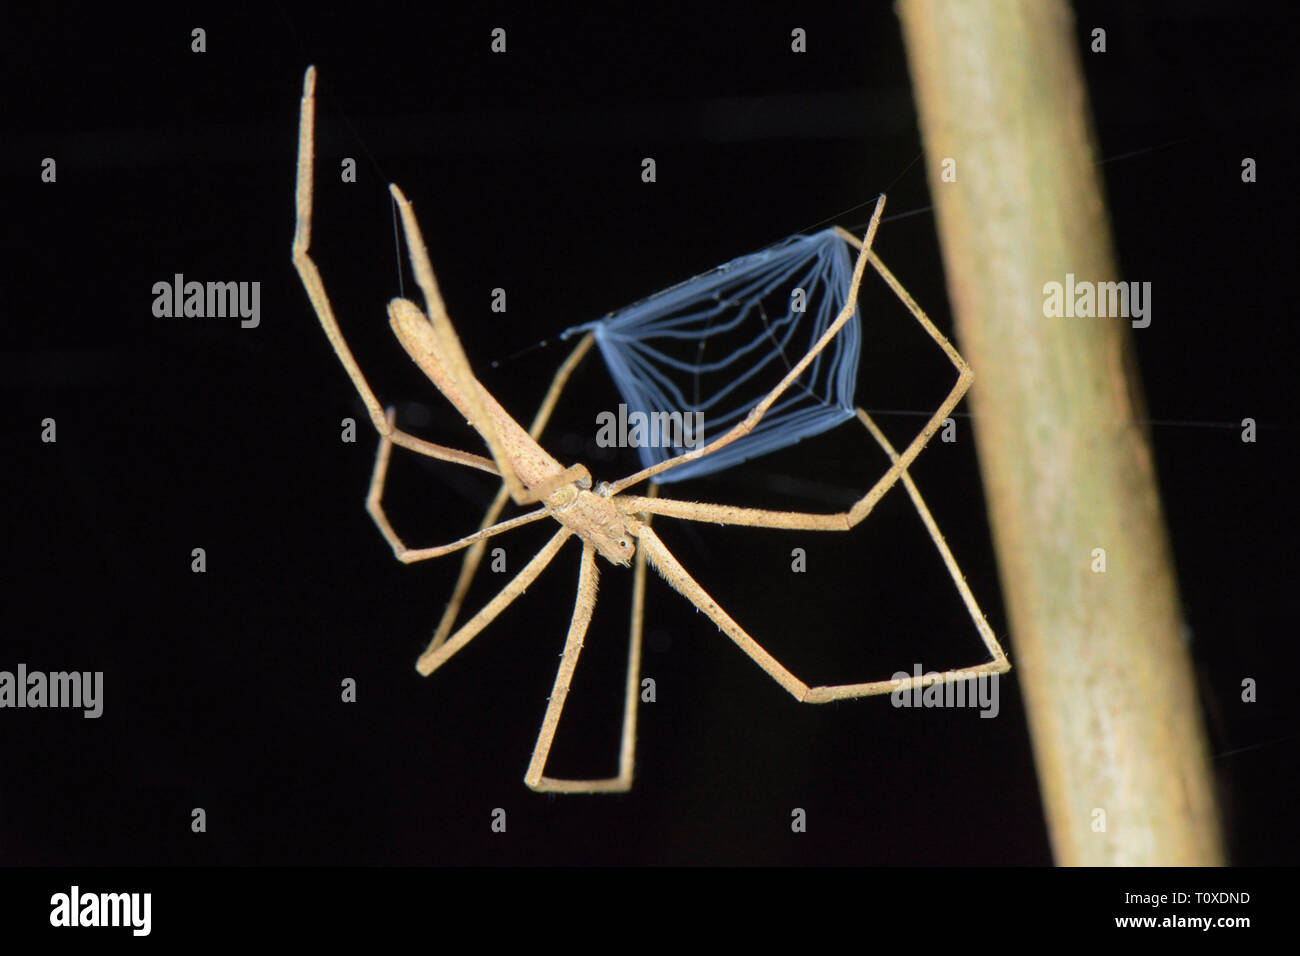 Deinopidae High Resolution Stock Photography and Images - Alamy